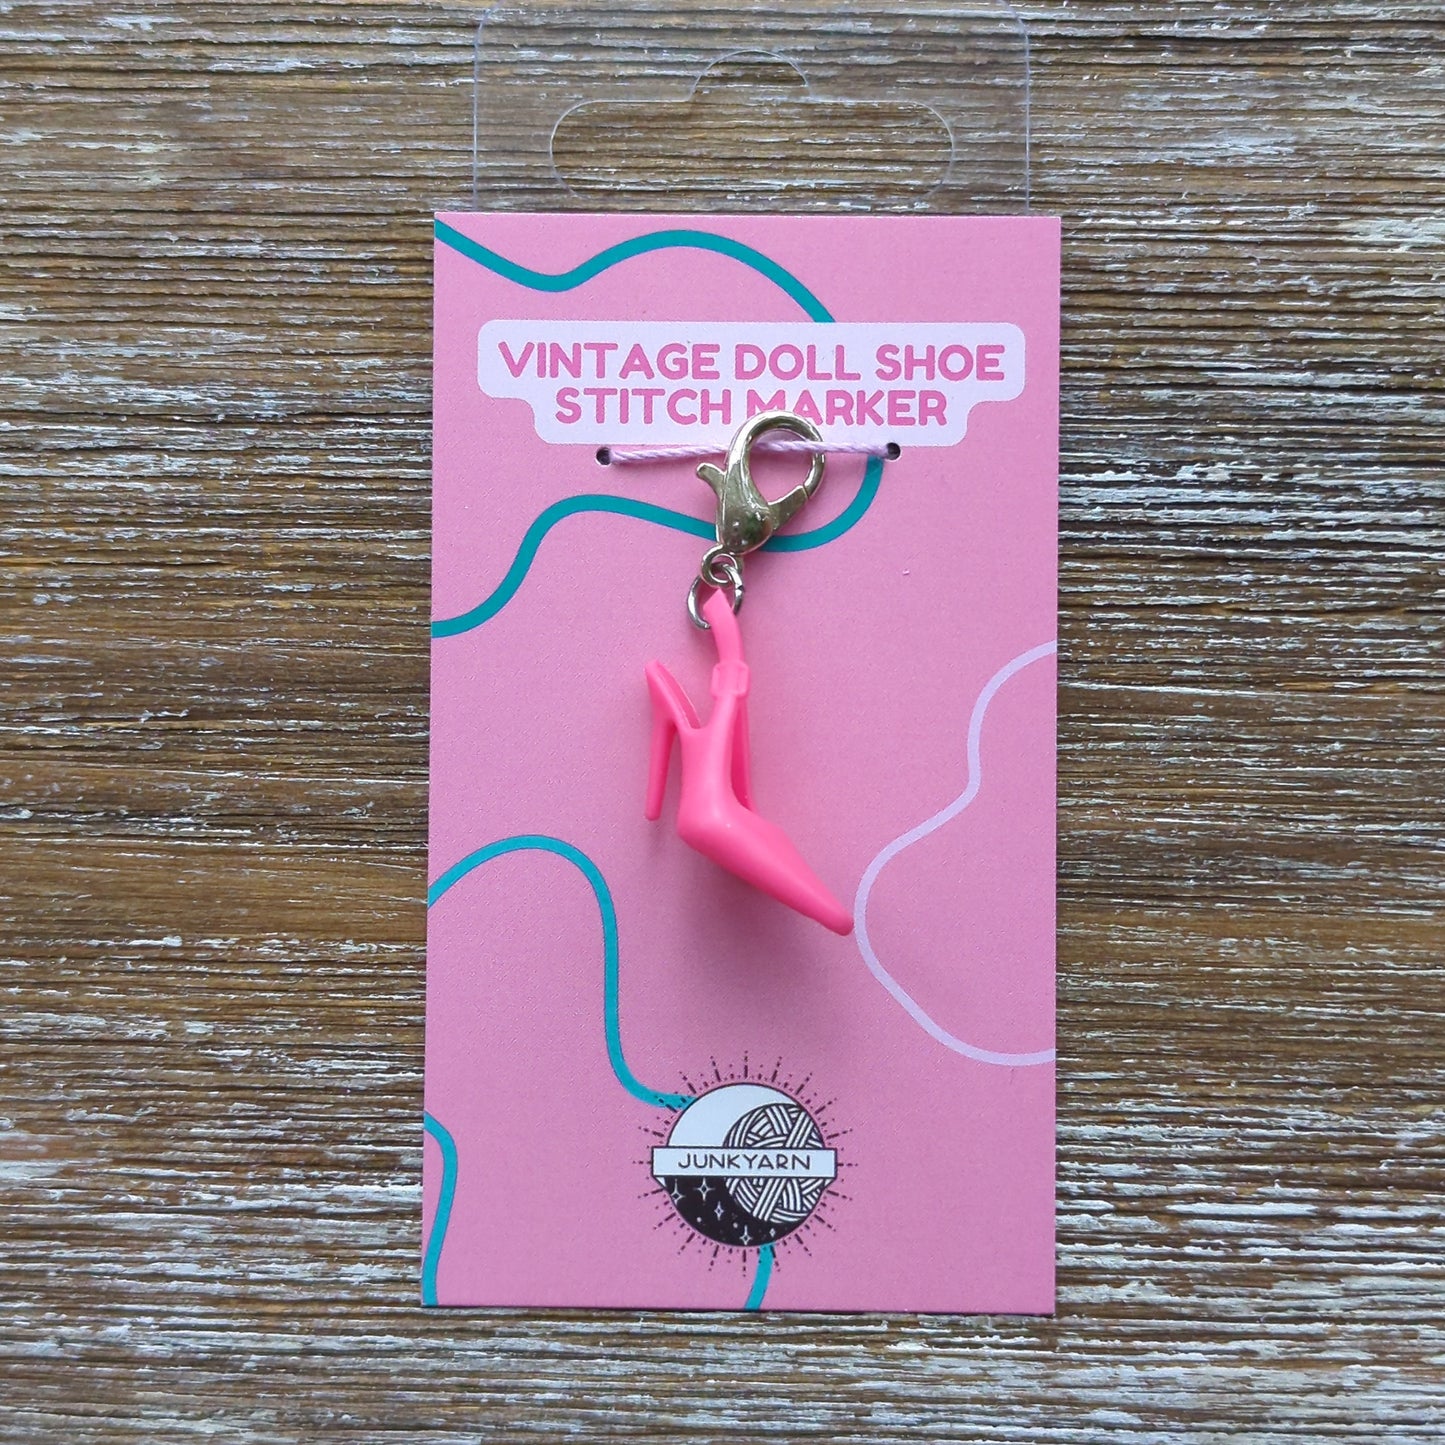 Vintage Barbie Shoe Stitch Markers w/ Lobster Claw - Ready to Ship